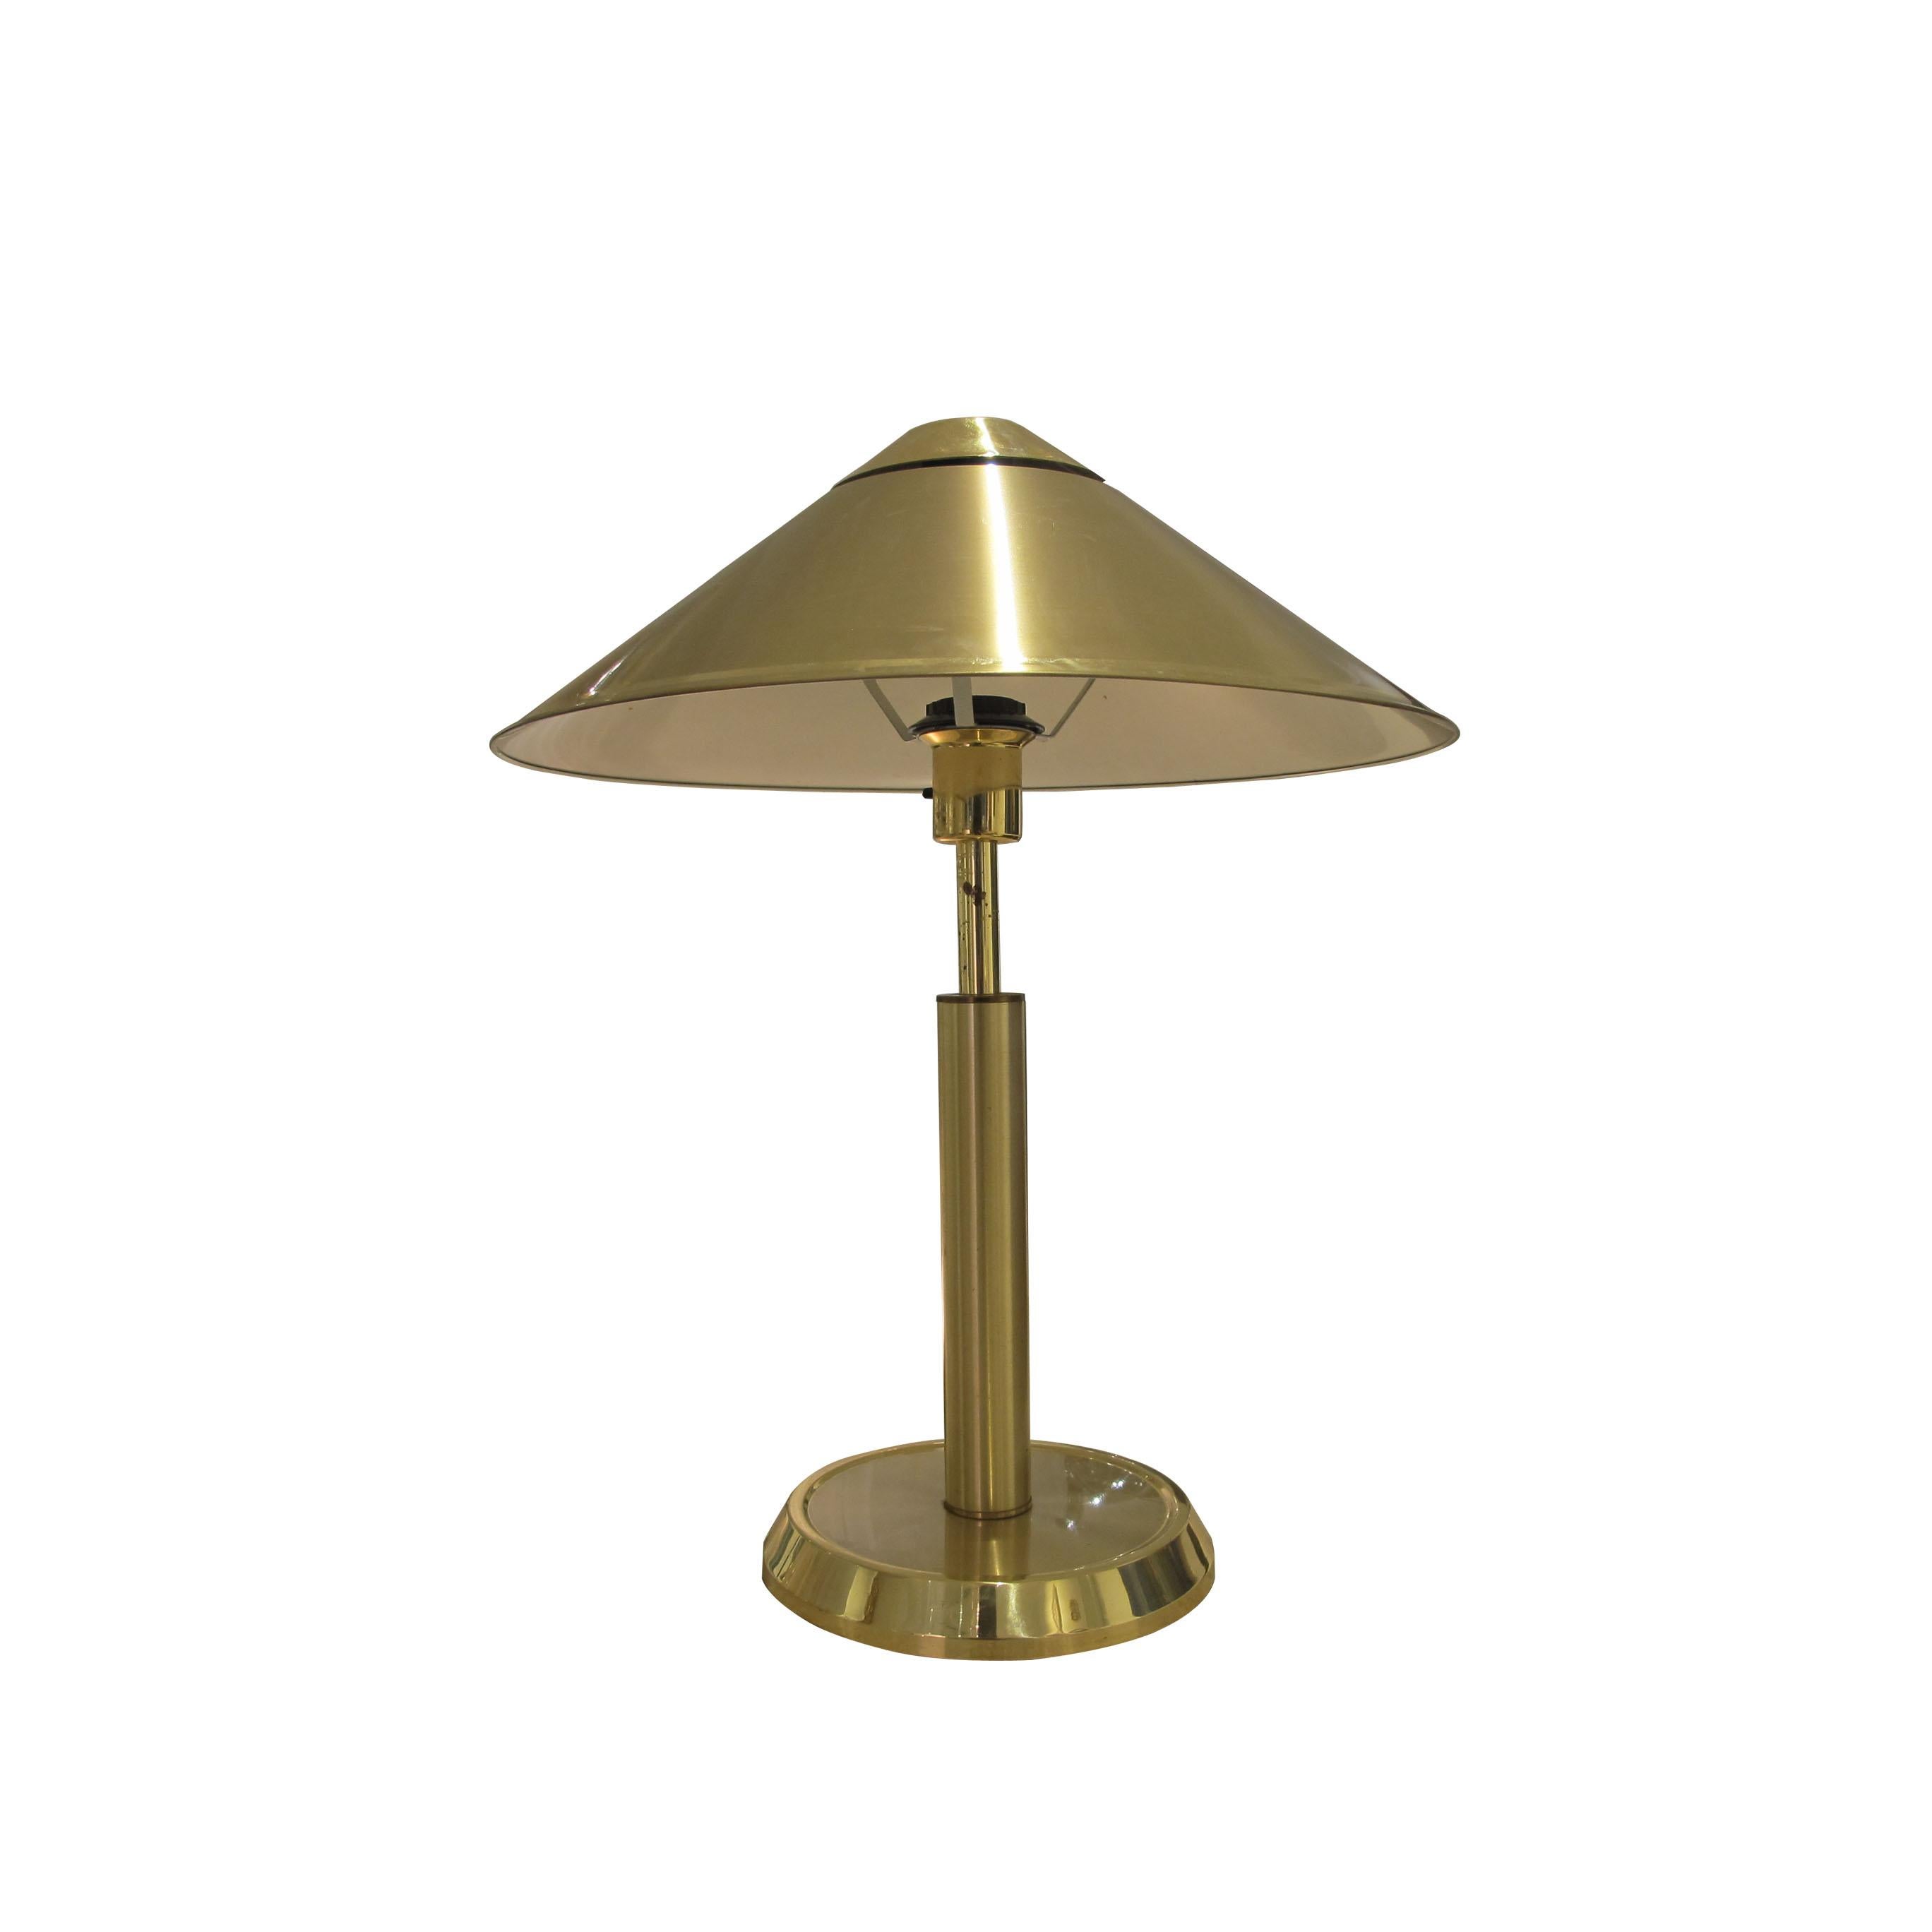 1970s Swedish Large Pair Of Brass Table Lamps With Cone Shaped Shades In Good Condition For Sale In London, GB